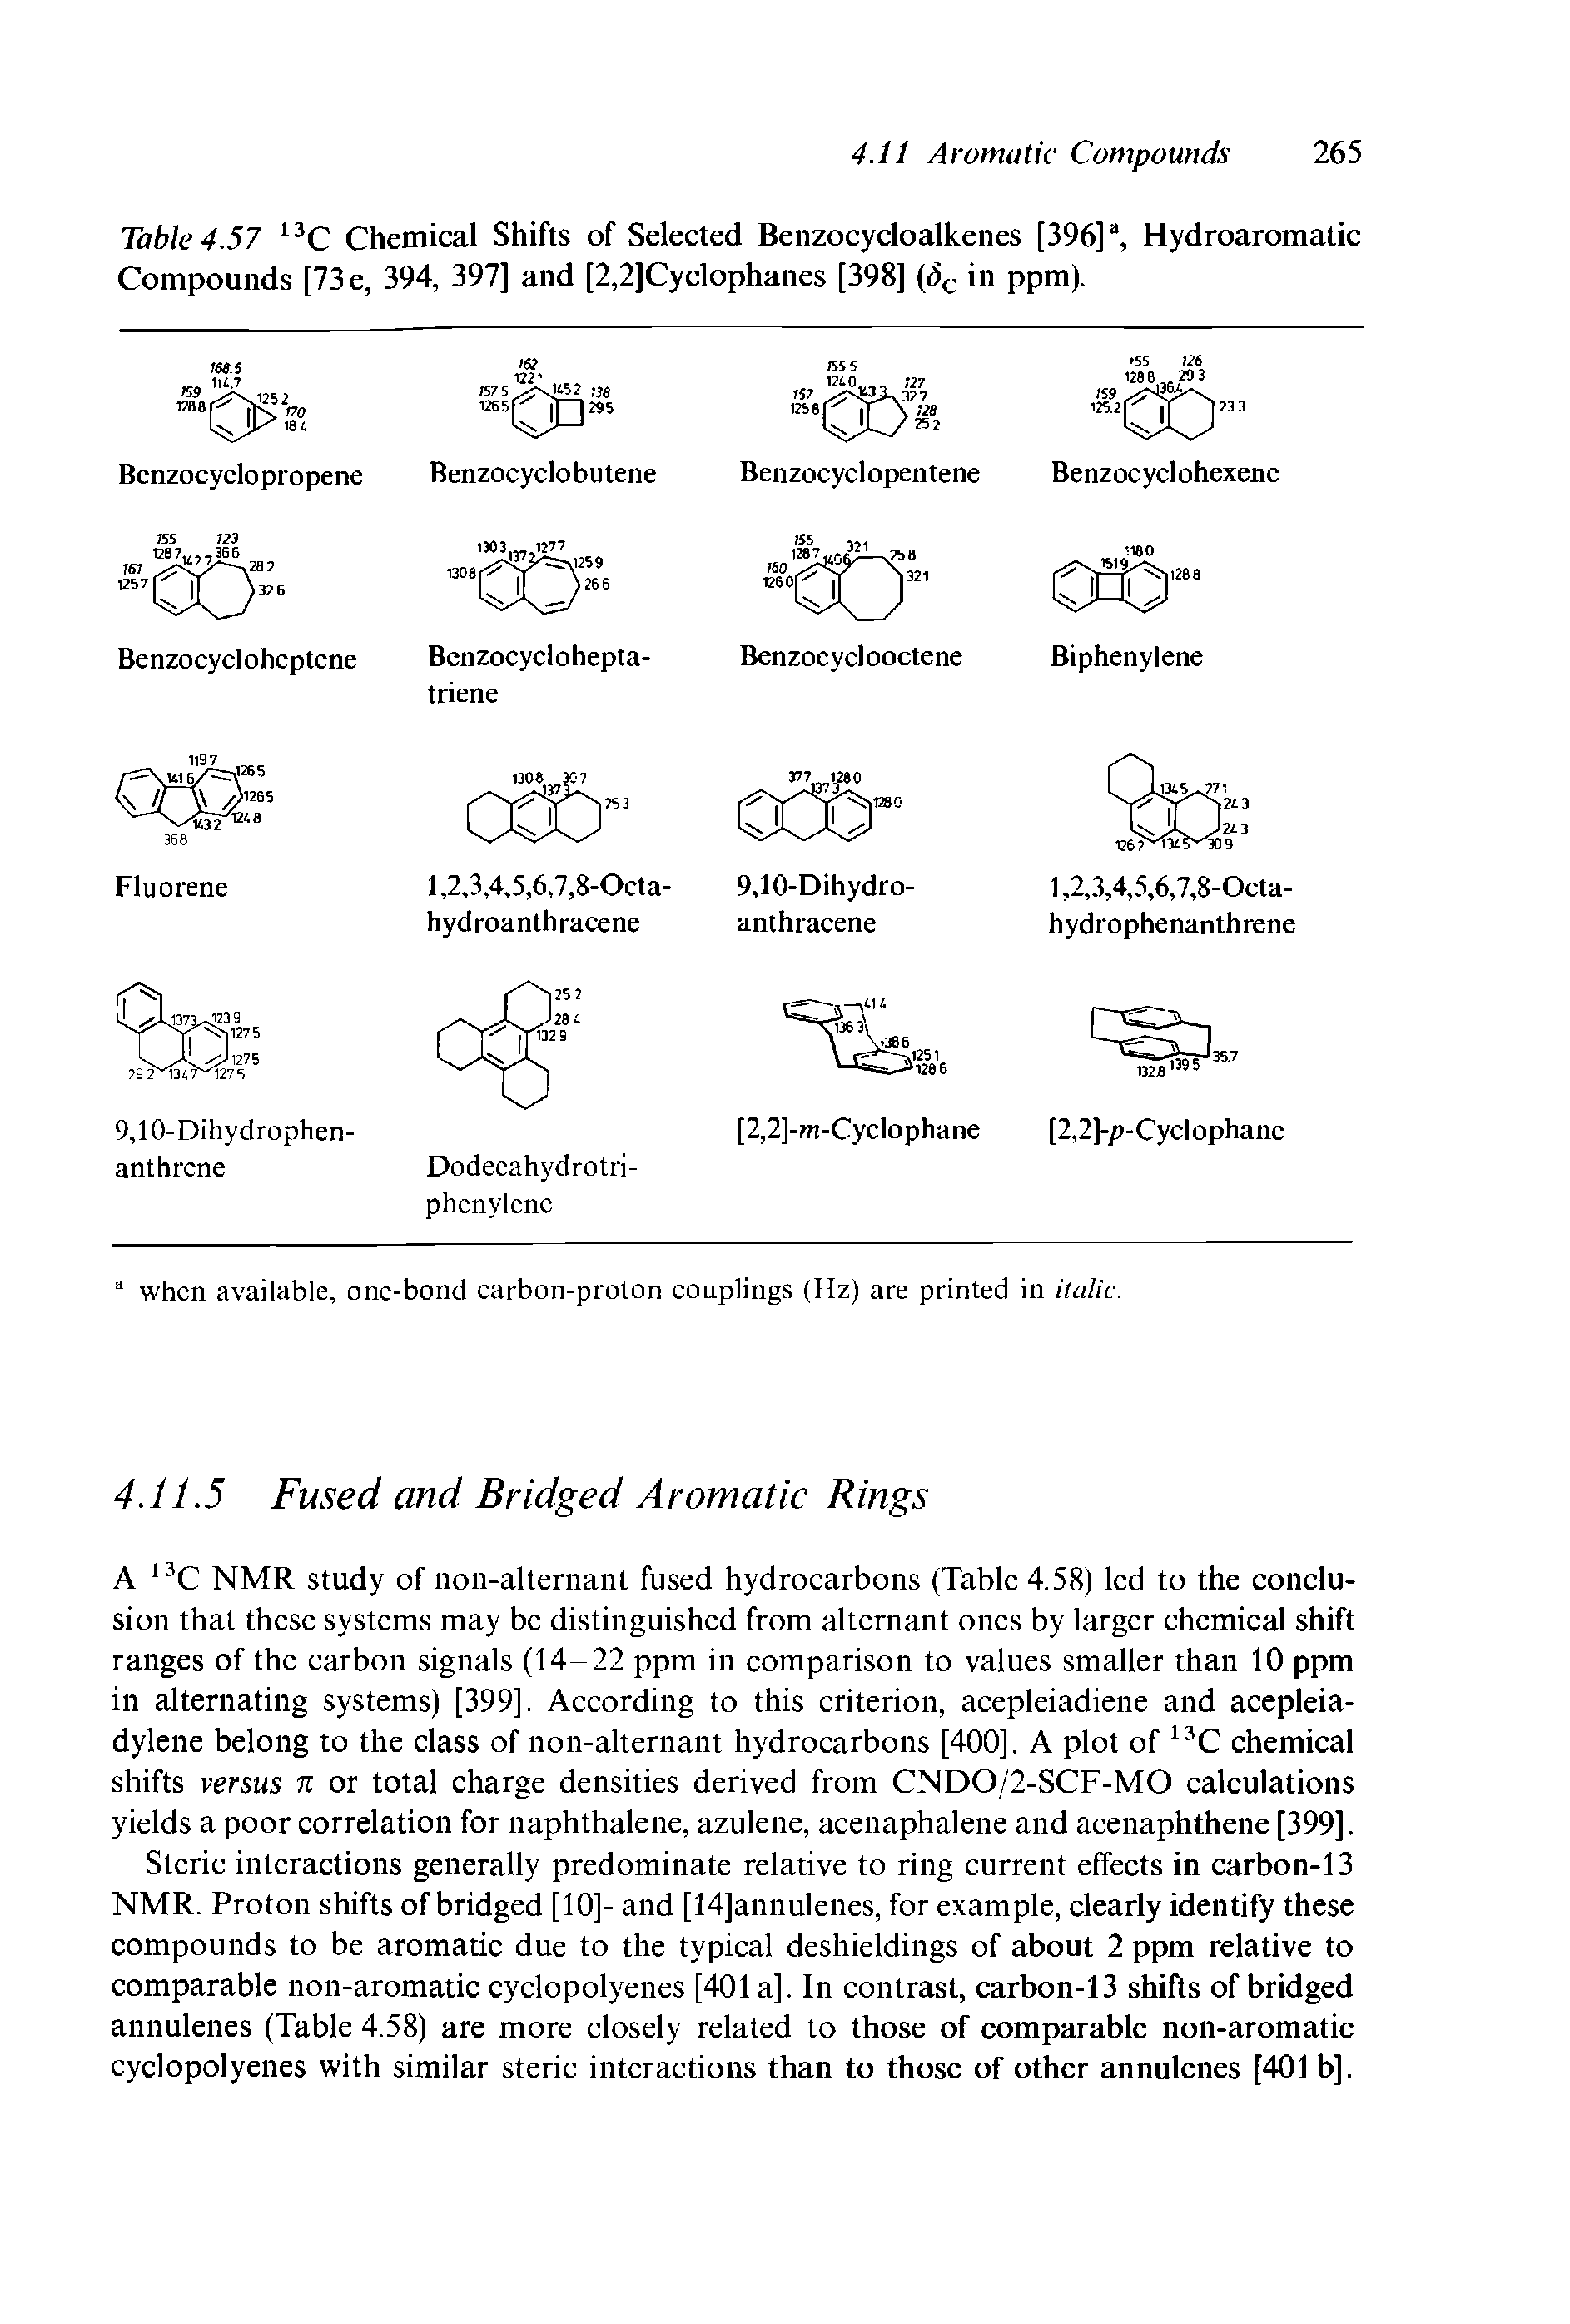 Table 4.57 13C Chemical Shifts of Selected Benzocycloalkenes [396]a, Hydroaromatic Compounds [73e, 394, 397] and [2,2]Cyclophanes [398] (r5c in ppm).